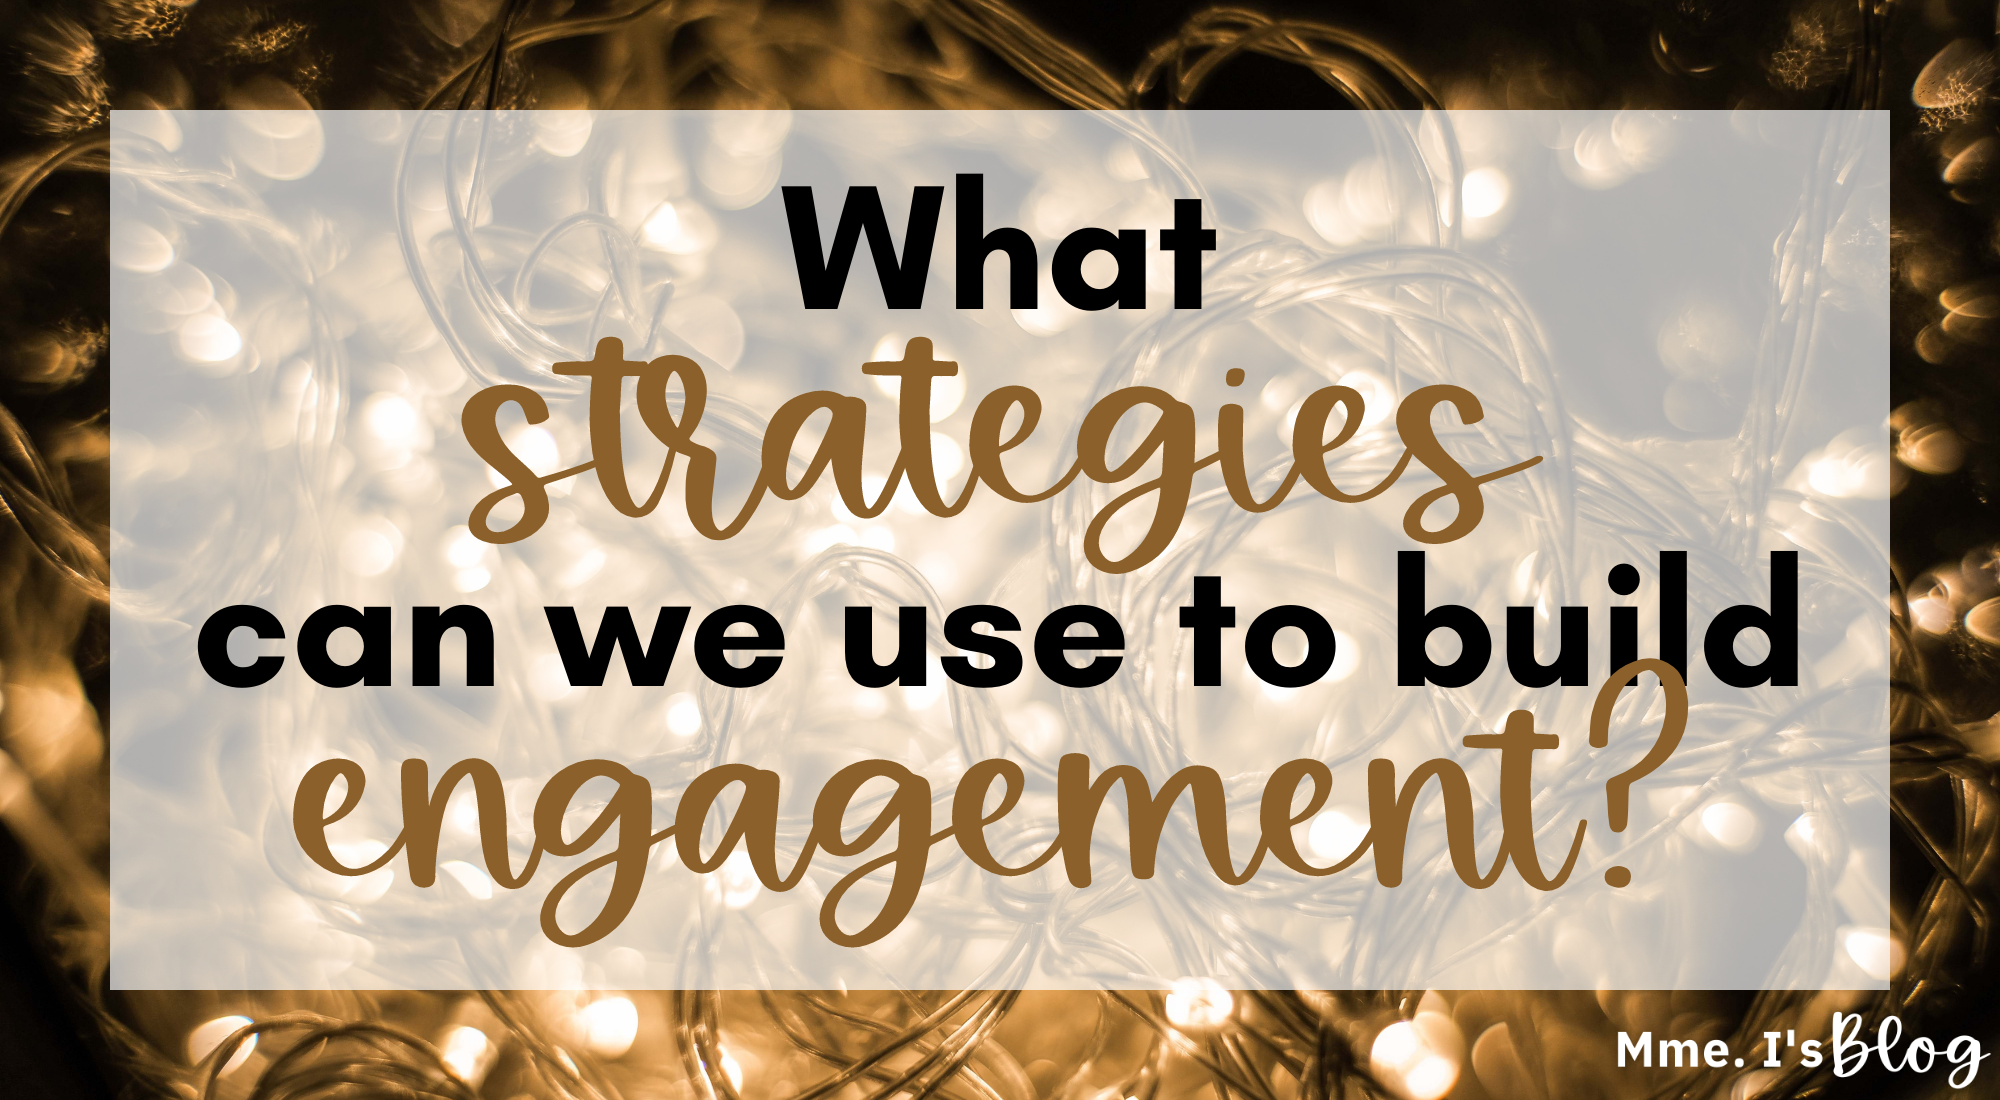 What strategies can we use to build engagememt?